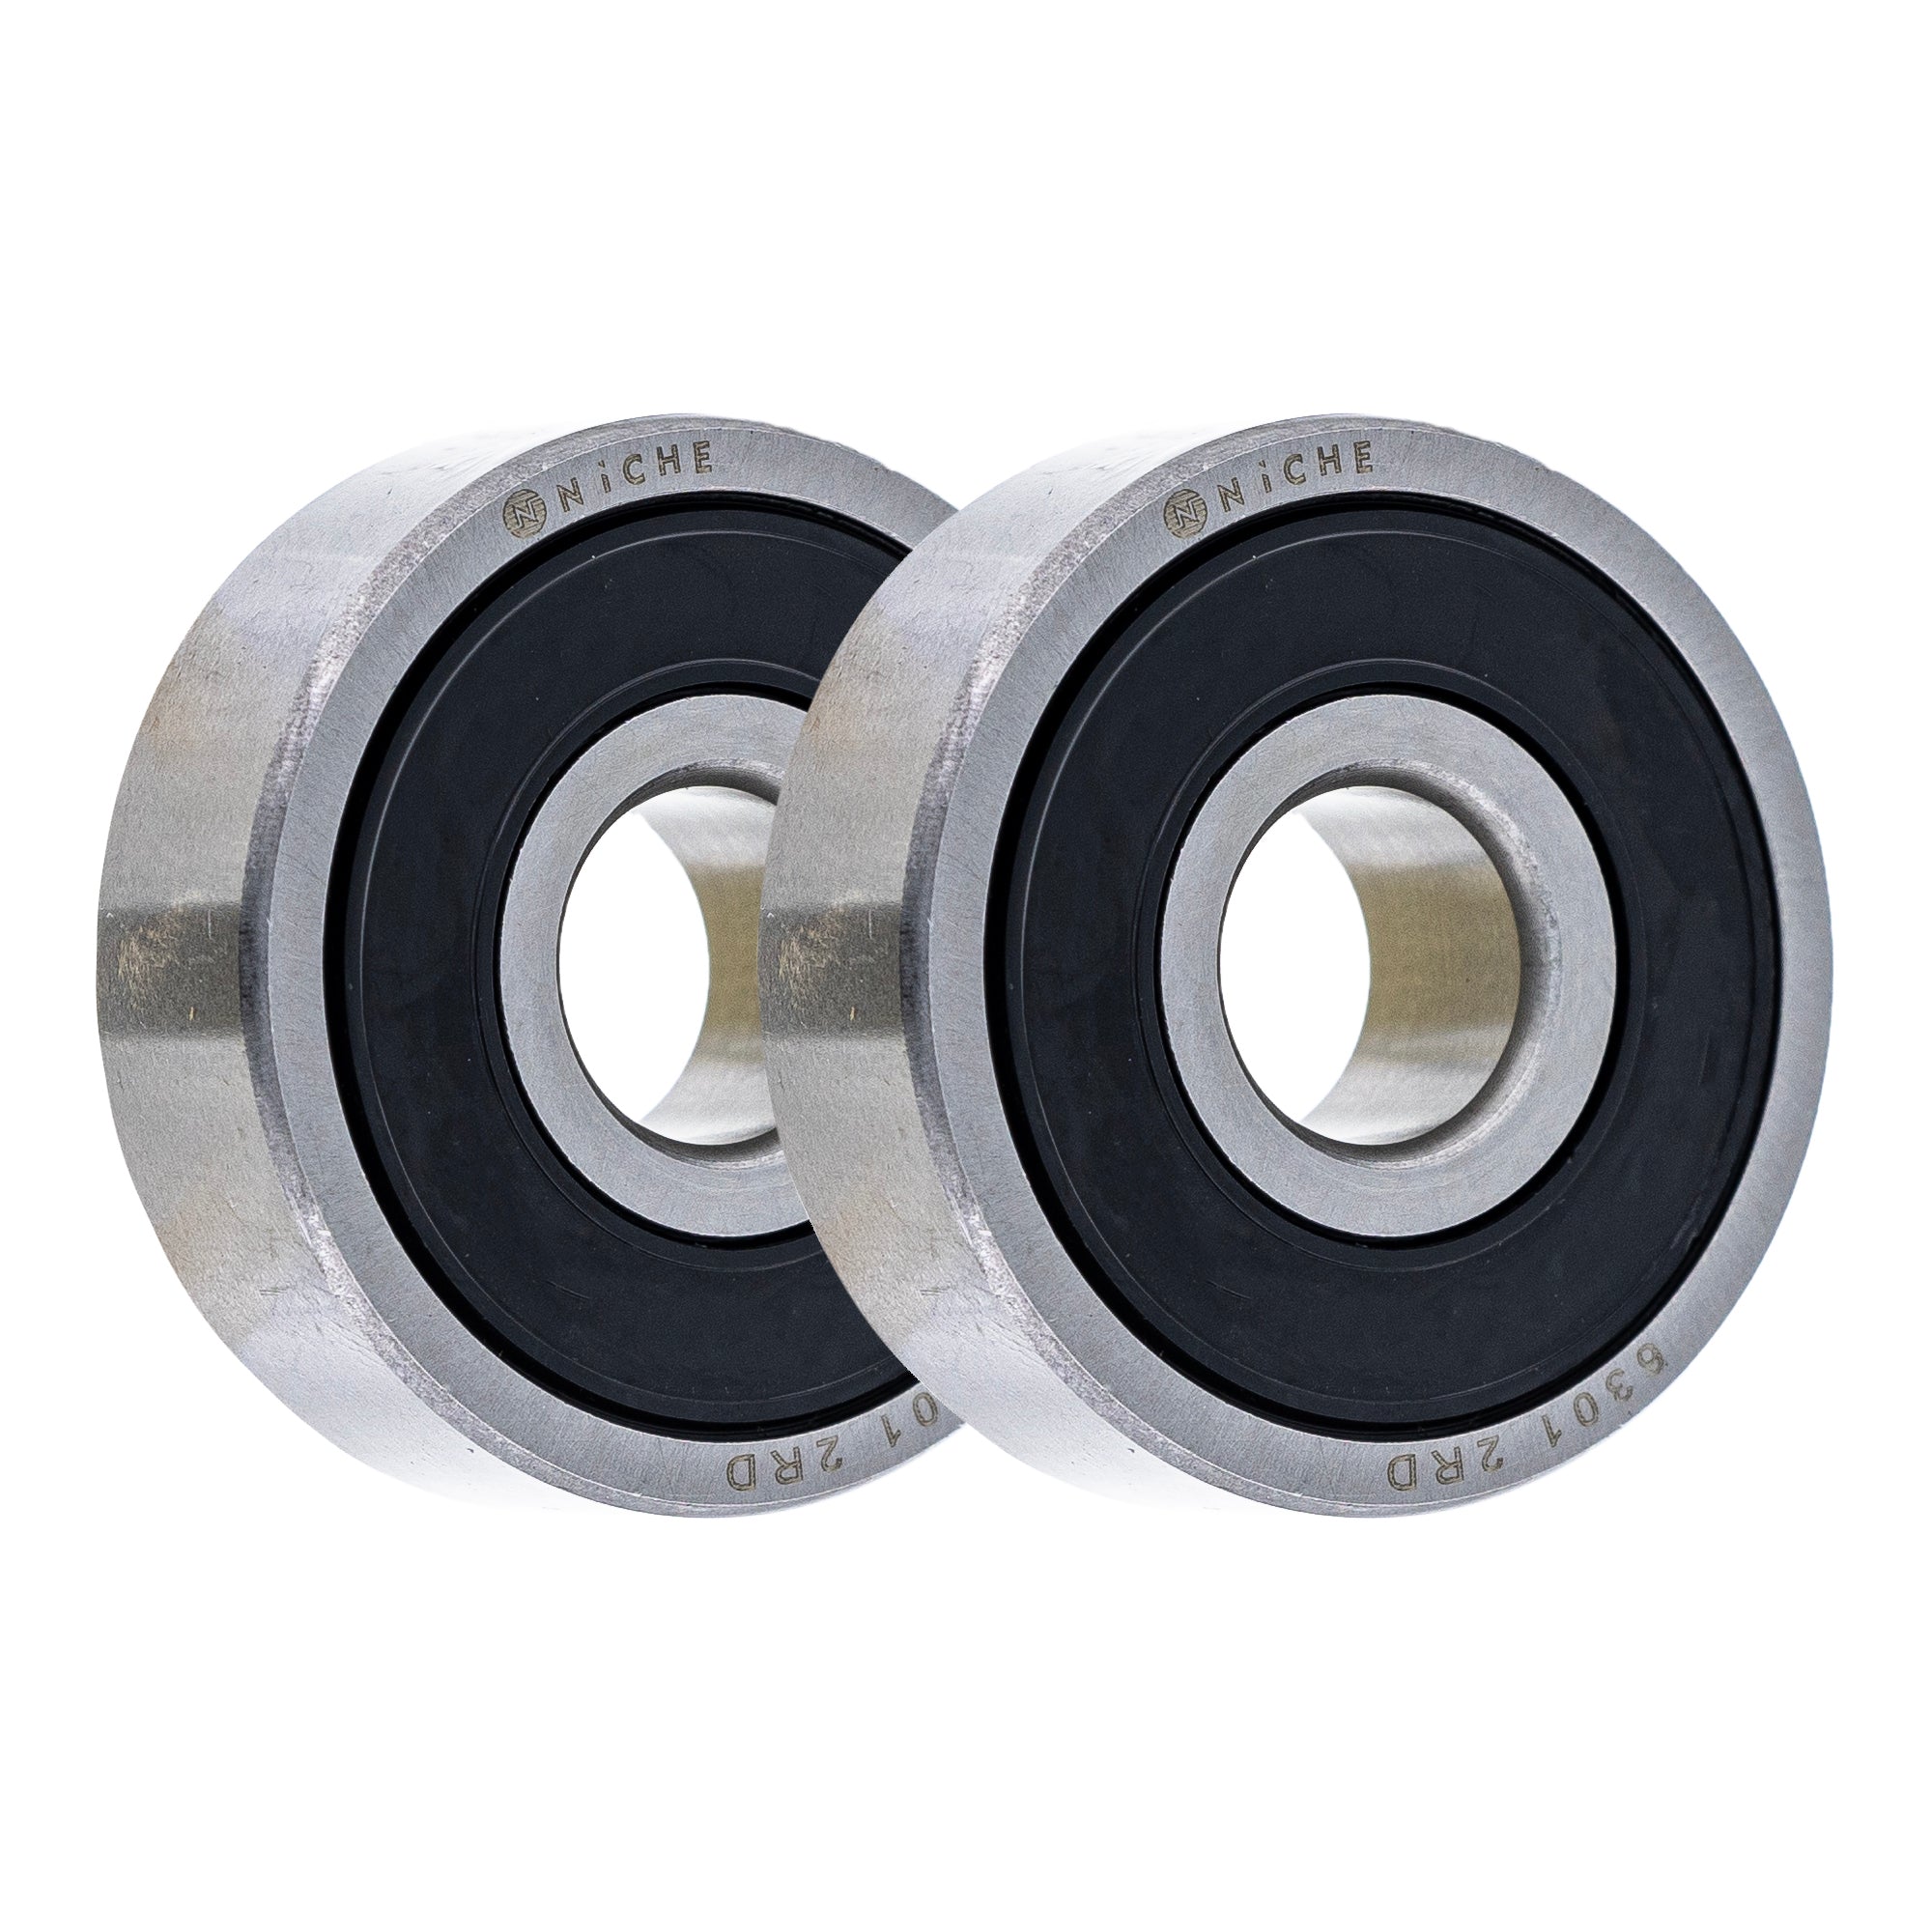 Electric Grade, Single Row, Deep Groove, Ball Bearing 2-Pack for zOTHER XR80R XR80 XR75 NICHE 519-CBB2342R